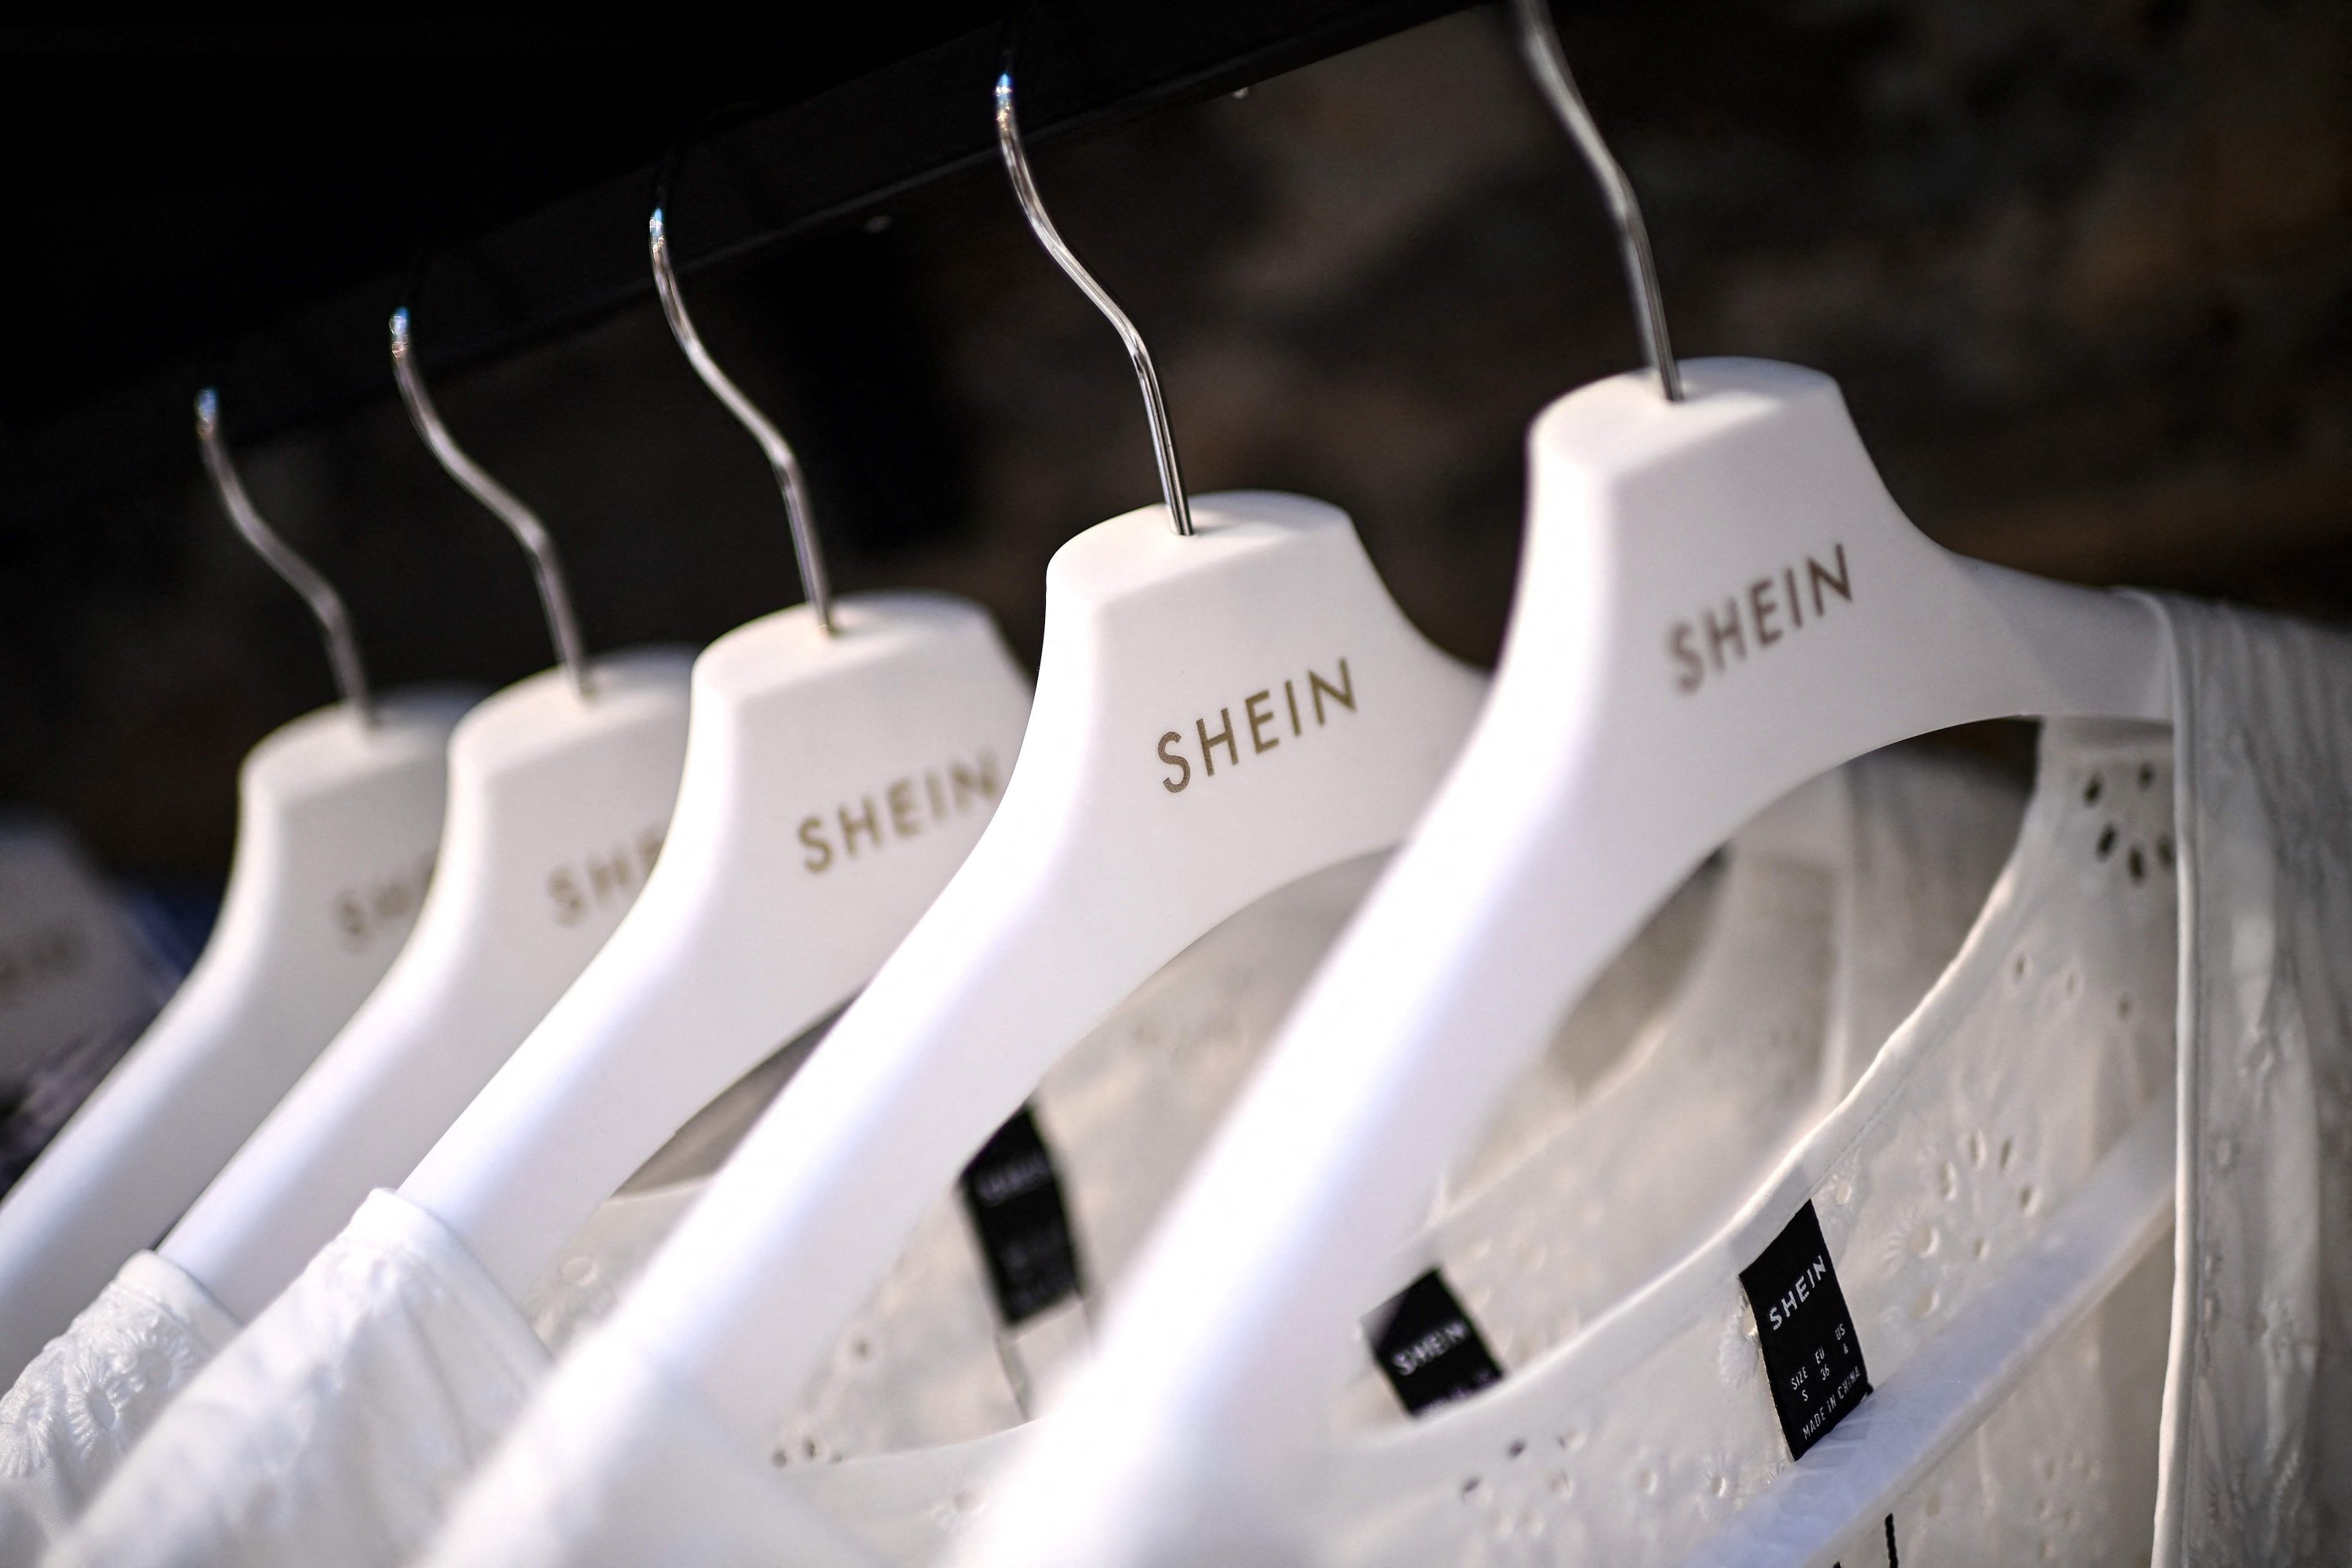 Shein Eco-Friendly Clothing Facts & Rating